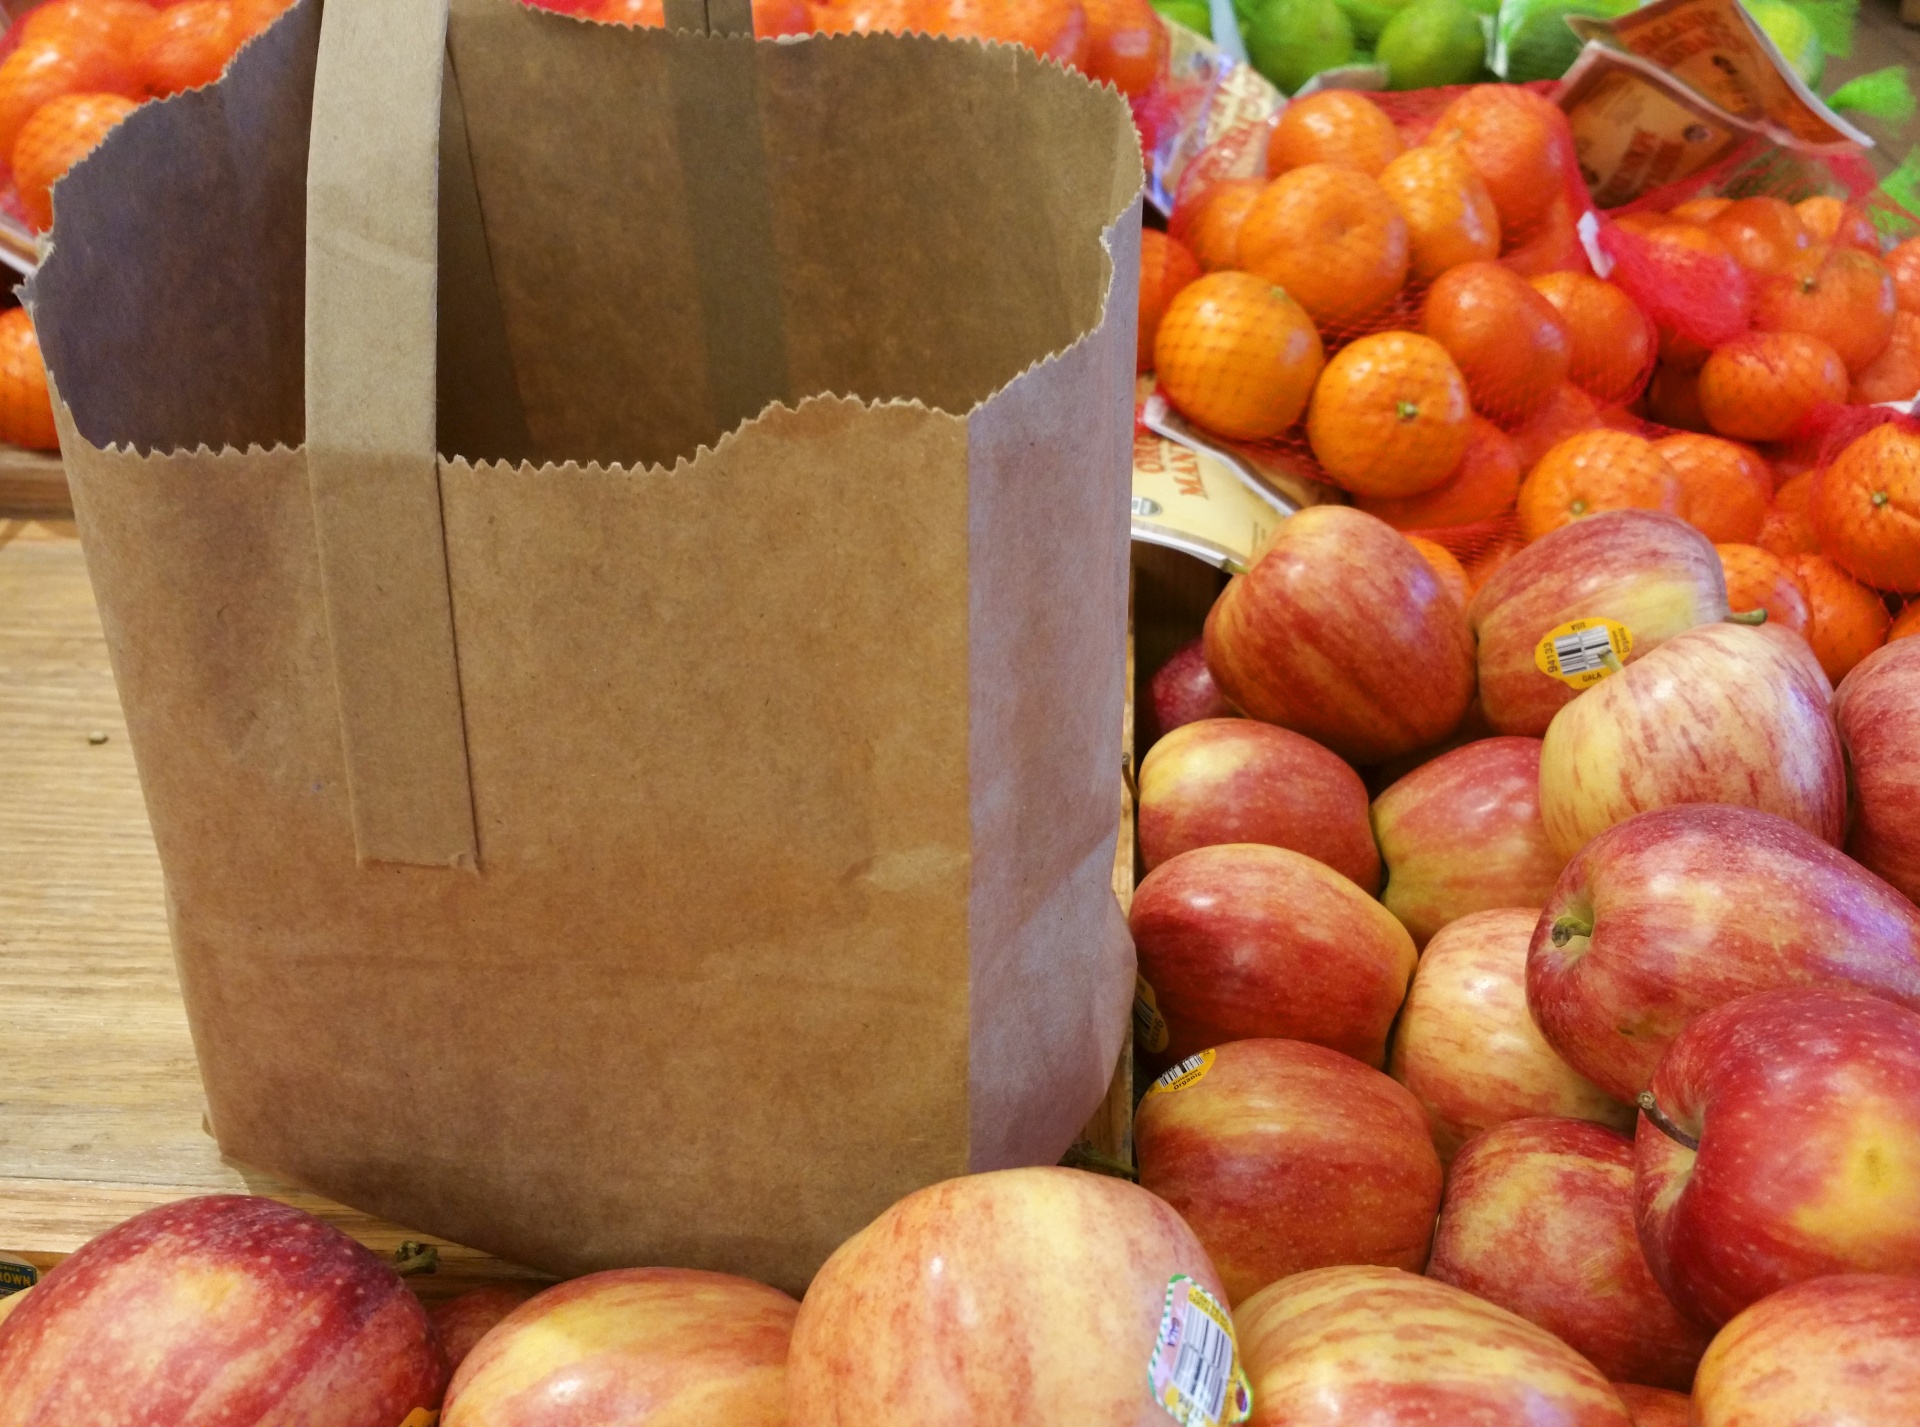 Brown Bag For Produce